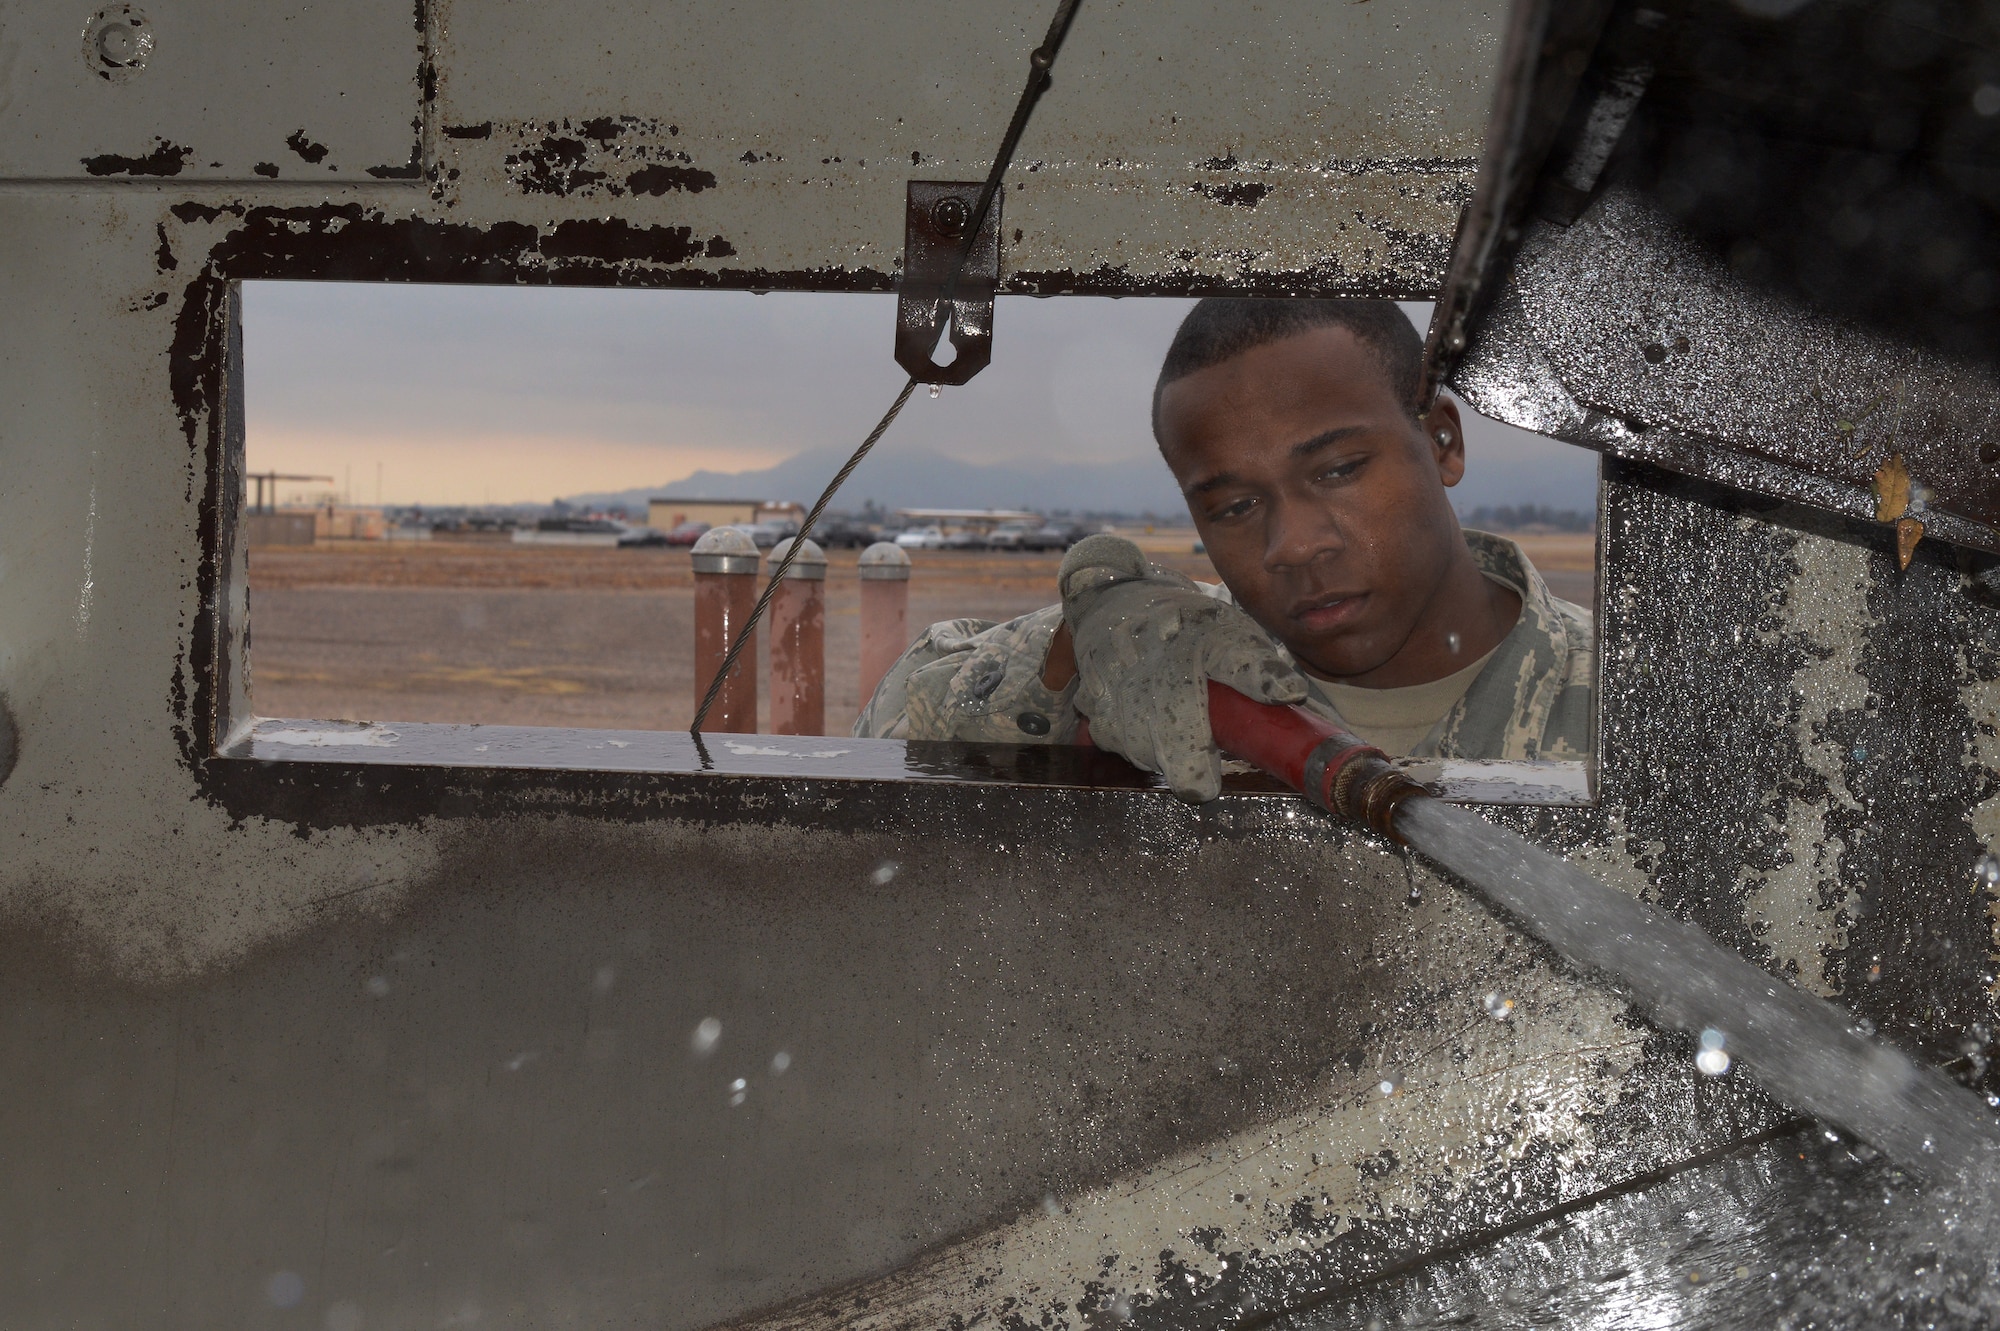 Airman 1st Class Demetrius Smith, 56th Civil Engineer Squadron heavy equipment operator, watches to make sure the interior gets clean while spraying out the street sweeper at Luke Air Force Base, Ariz., Jan. 5, 2016. (U.S. Air Force photo by Senior Airman James Hensley)